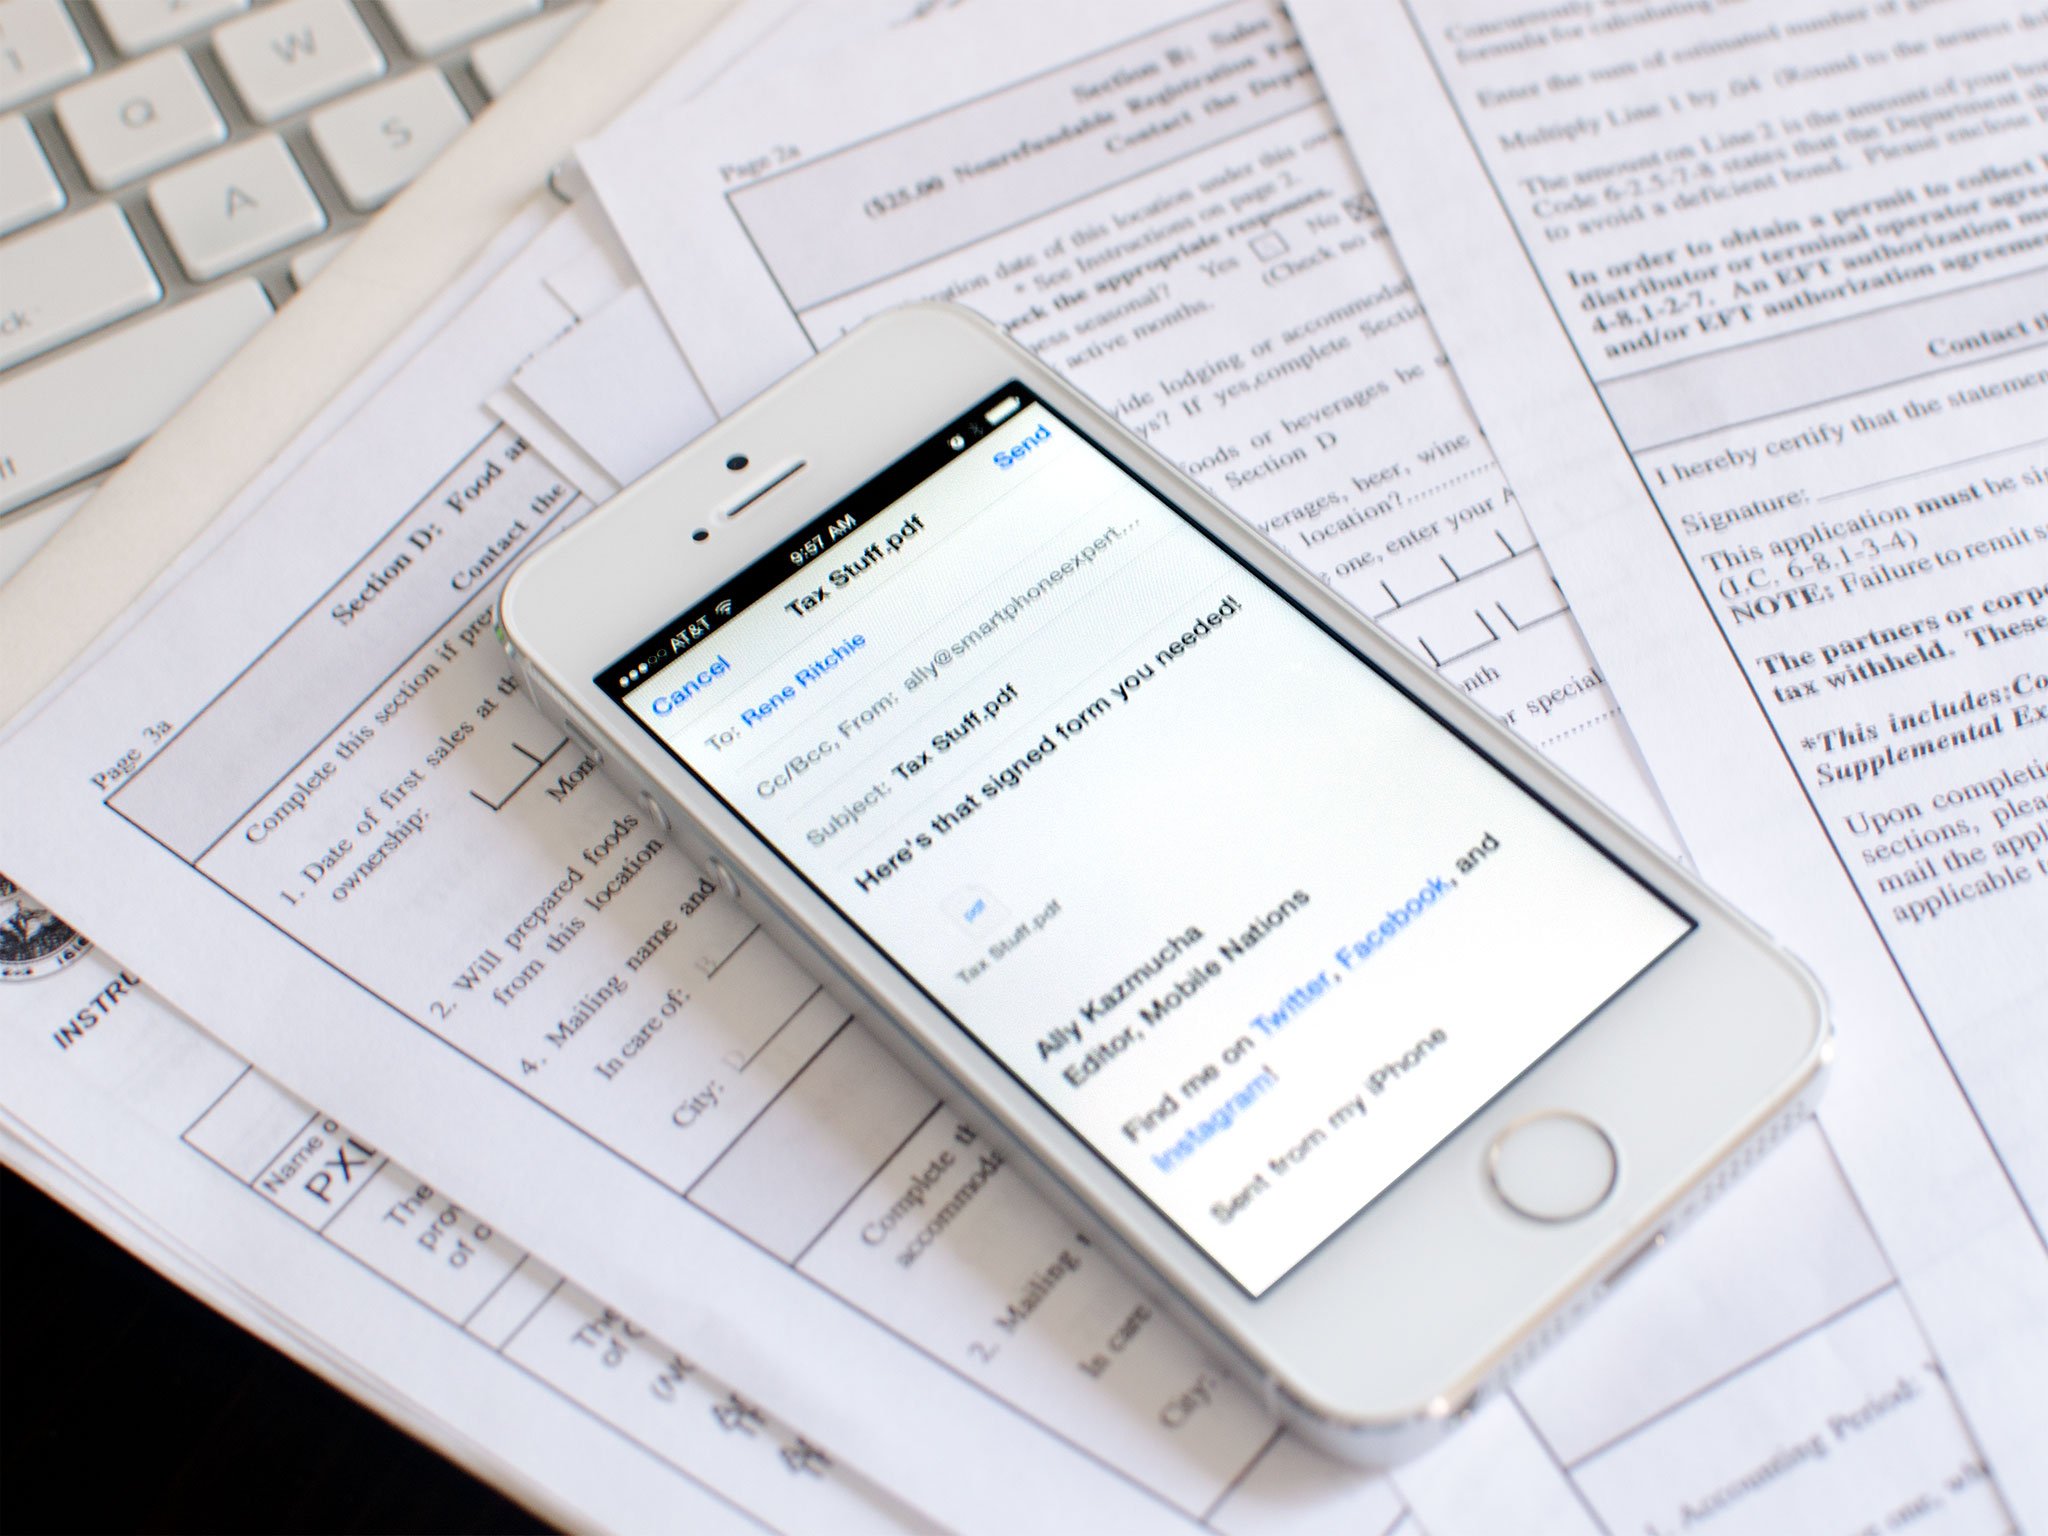 How to scan, sign, and send a PDF from your iPhone or iPad, no printer required!